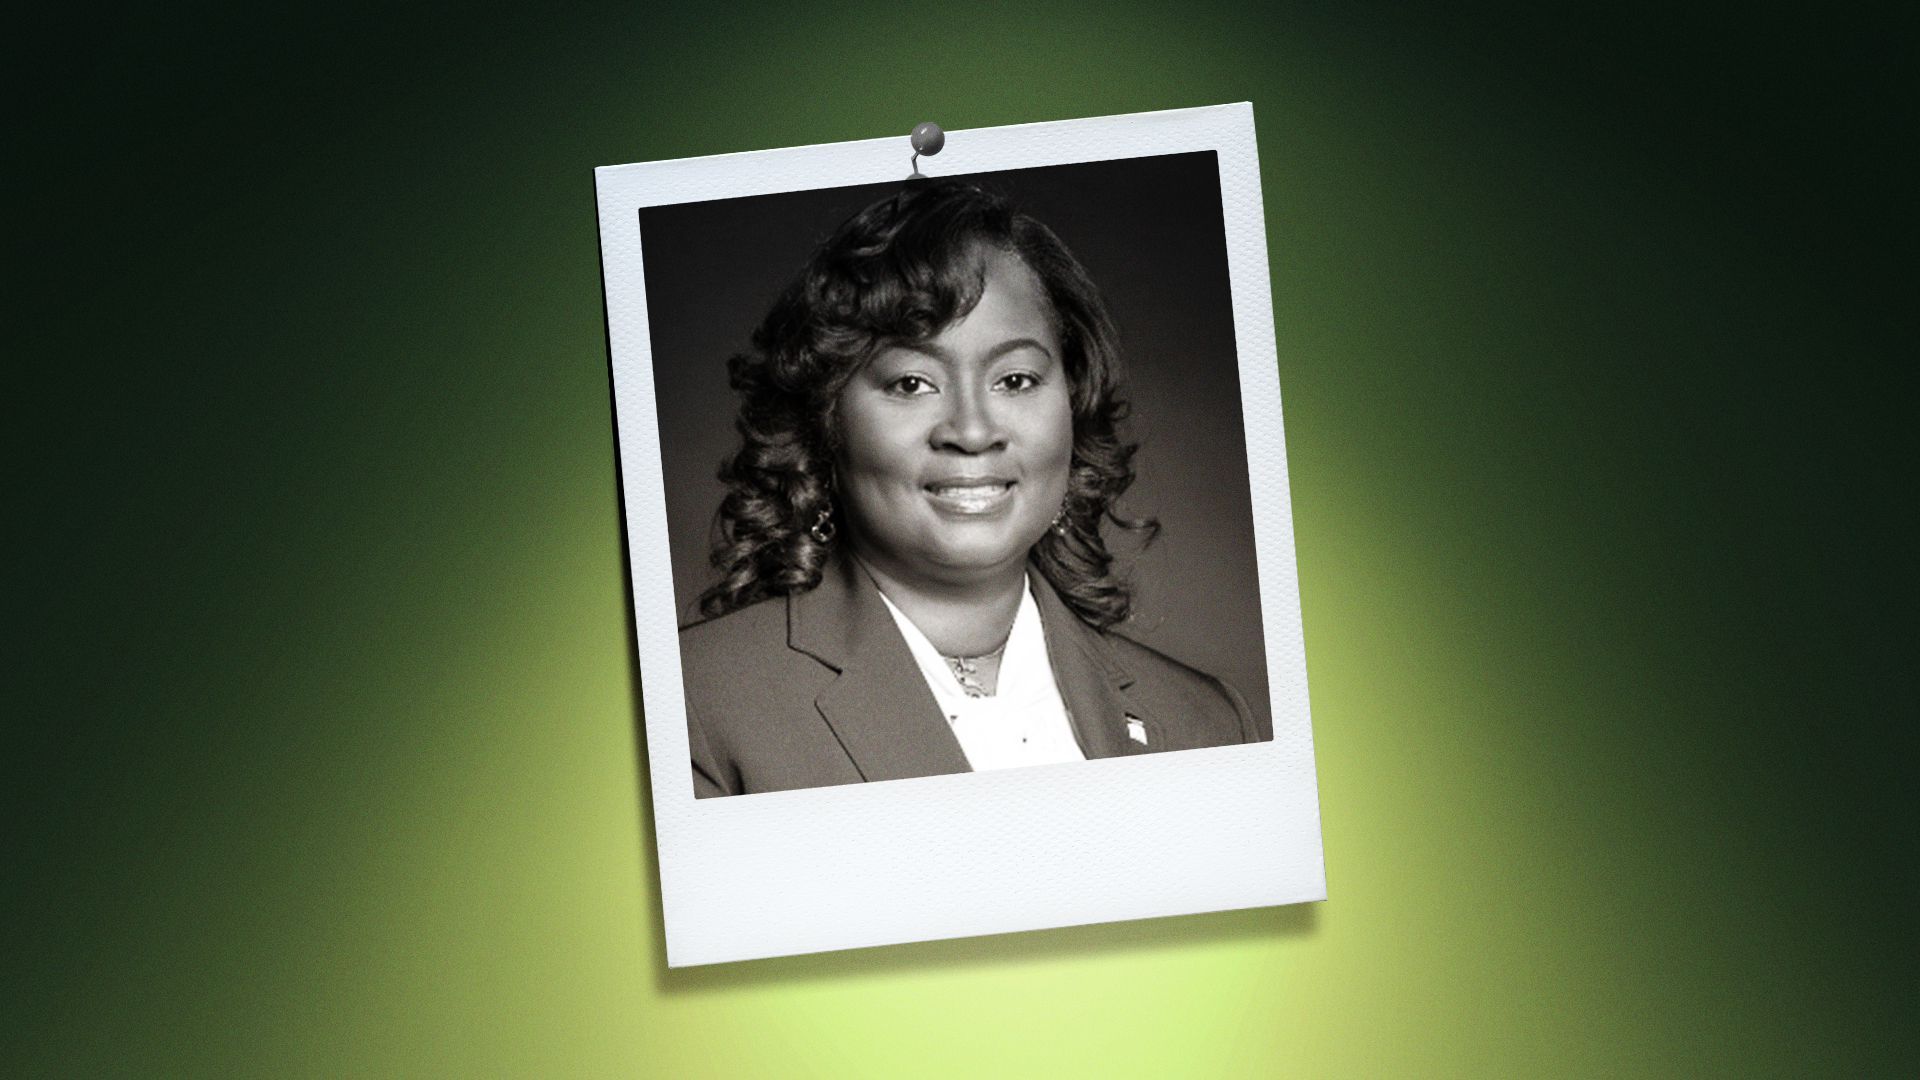 Photo illustration of Shinica Thomas, chair of the Wake County Commissioners, in the center of a Polaroid photo under a green spotlight.